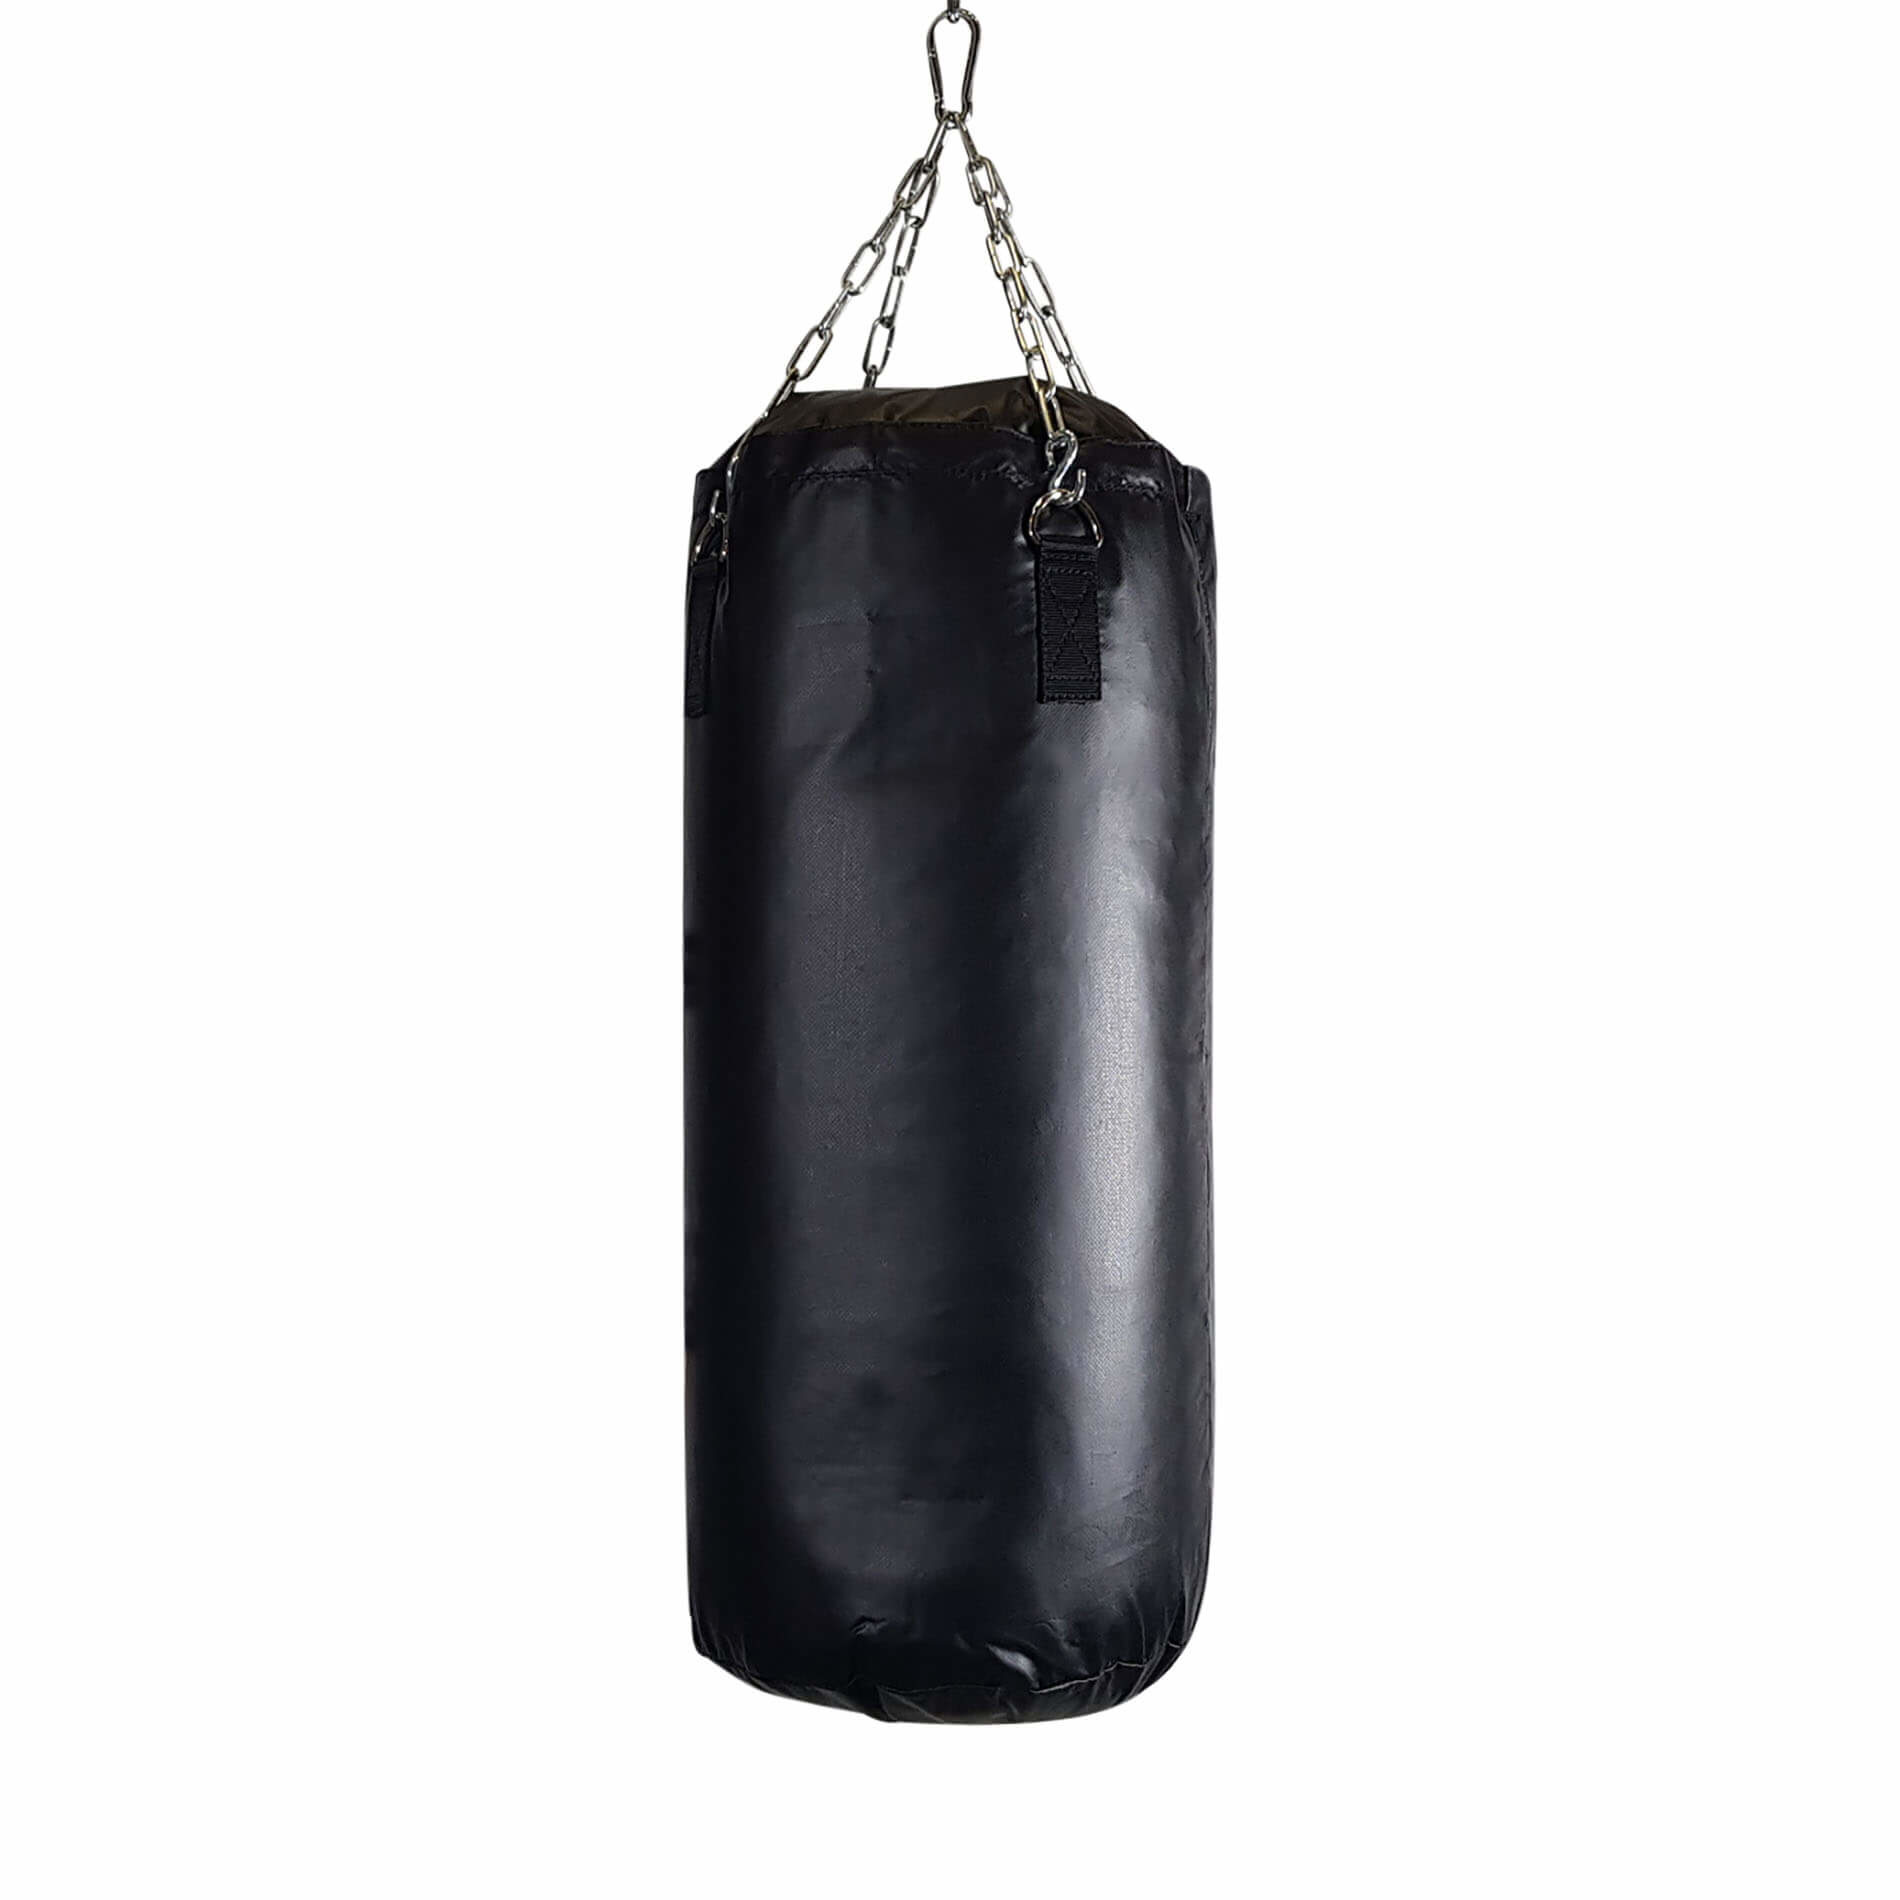 Boxing Bag Filled with Chain - Tunturi Fitness